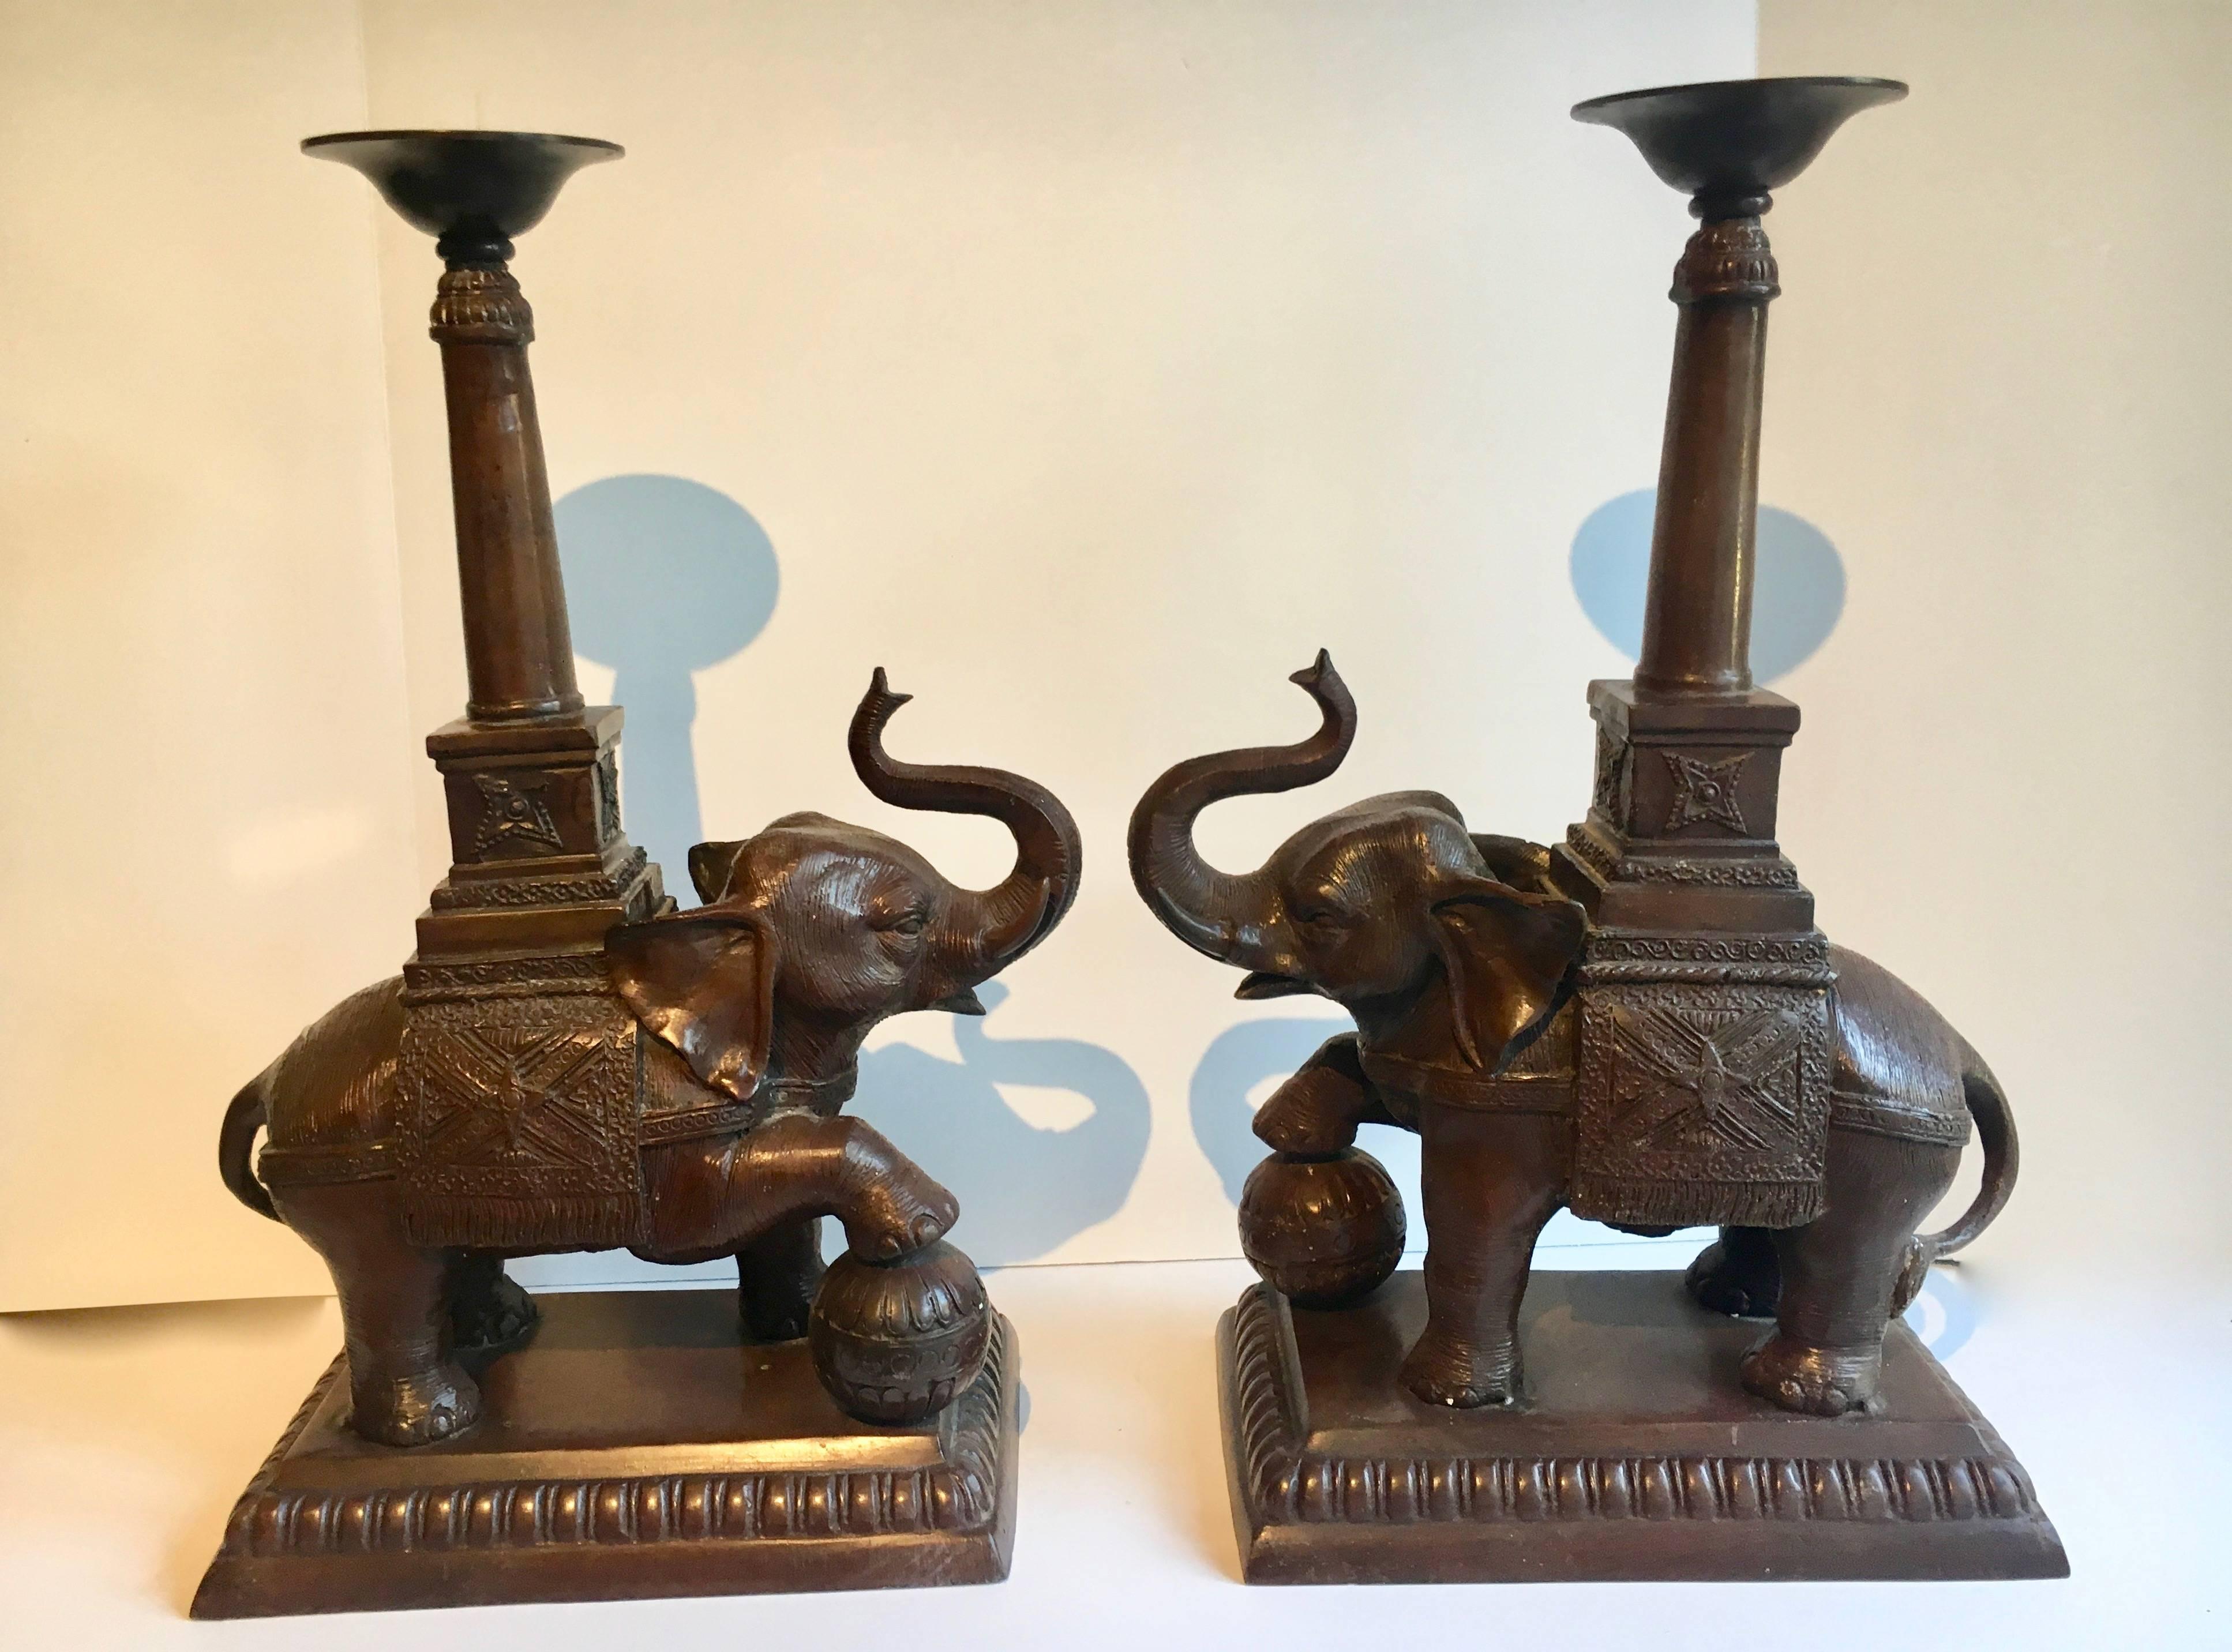 Pair of Maitland Smith elephant candlesticks, a compliment to your dining or console table. Elephants bring good luck and never forget! These pieces are signed indicating they are hand made by Maitland Smith.